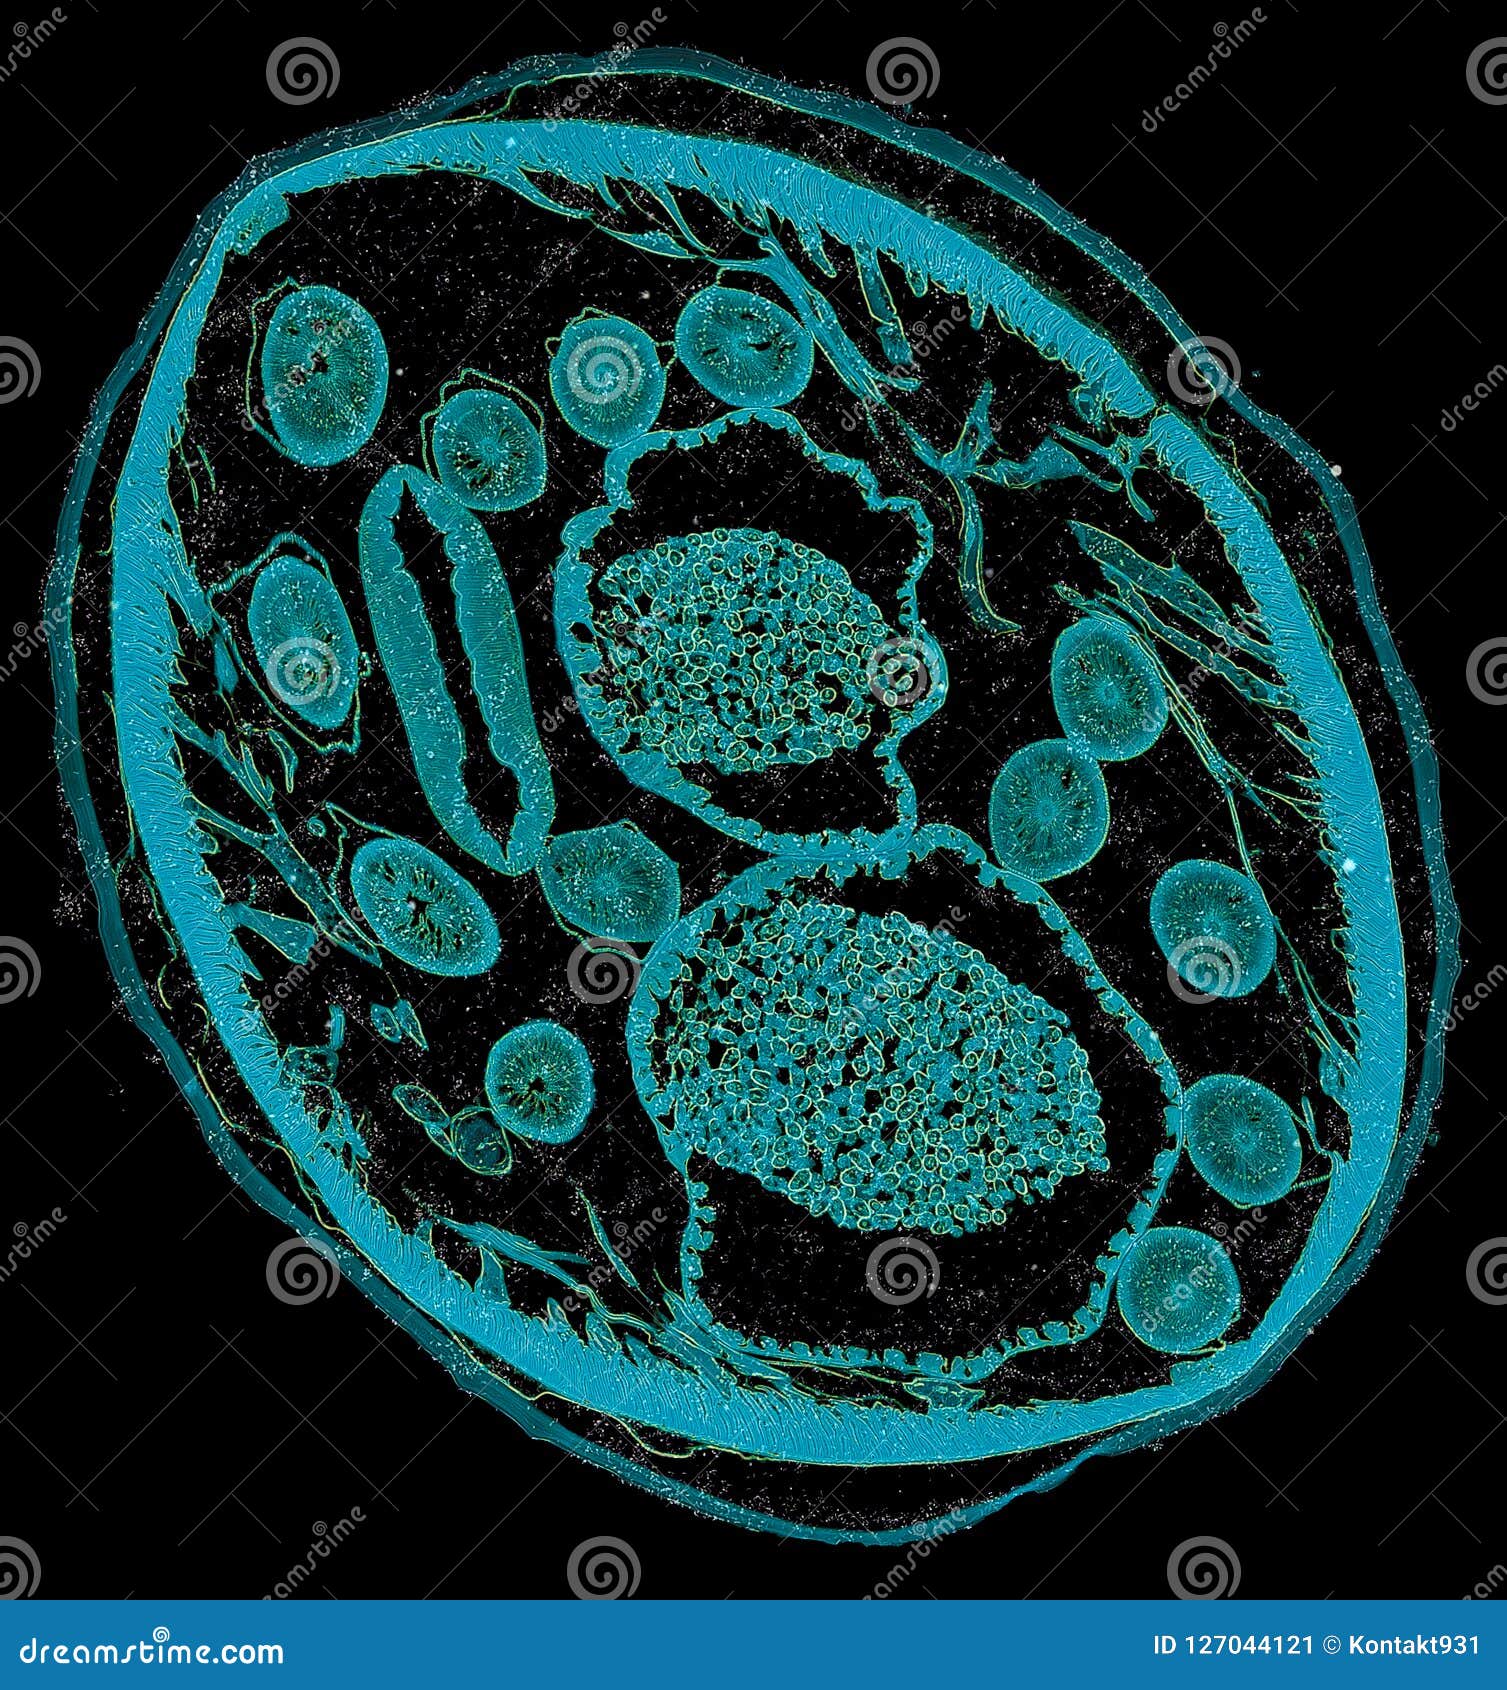 Cross Section Cut Under the Microscope â€“ Microscopic View of Animal Cells  for Education Stock Image - Image of cell, brain: 127044121